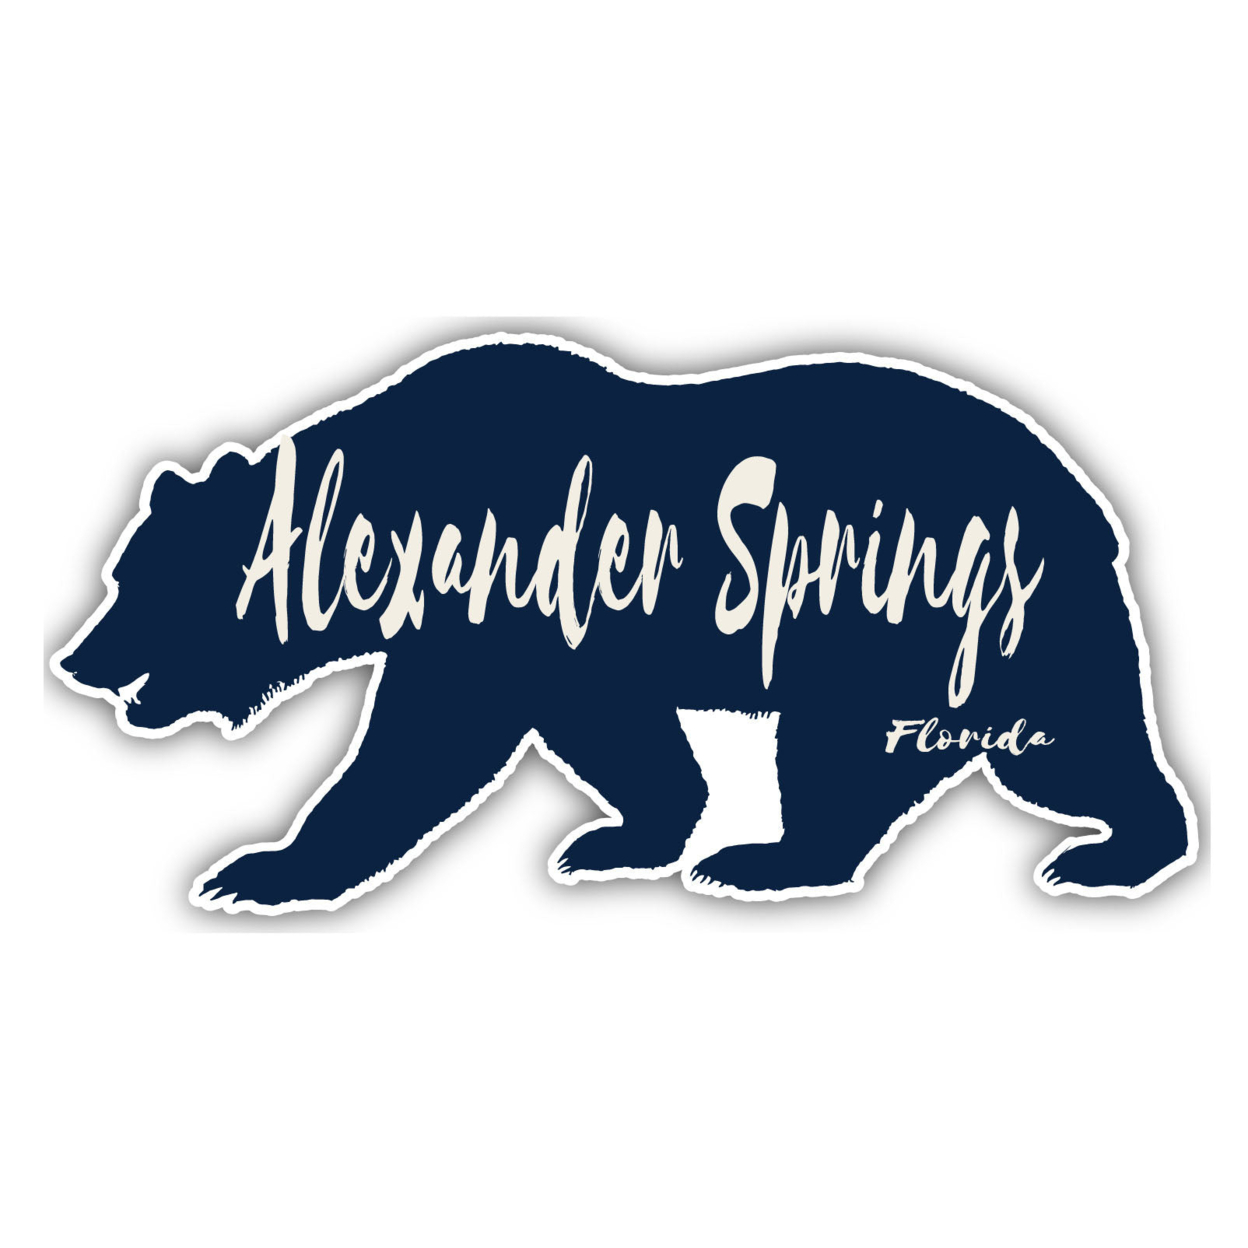 Alexander Springs Florida Souvenir Decorative Stickers (Choose Theme And Size) - 4-Pack, 6-Inch, Camp Life